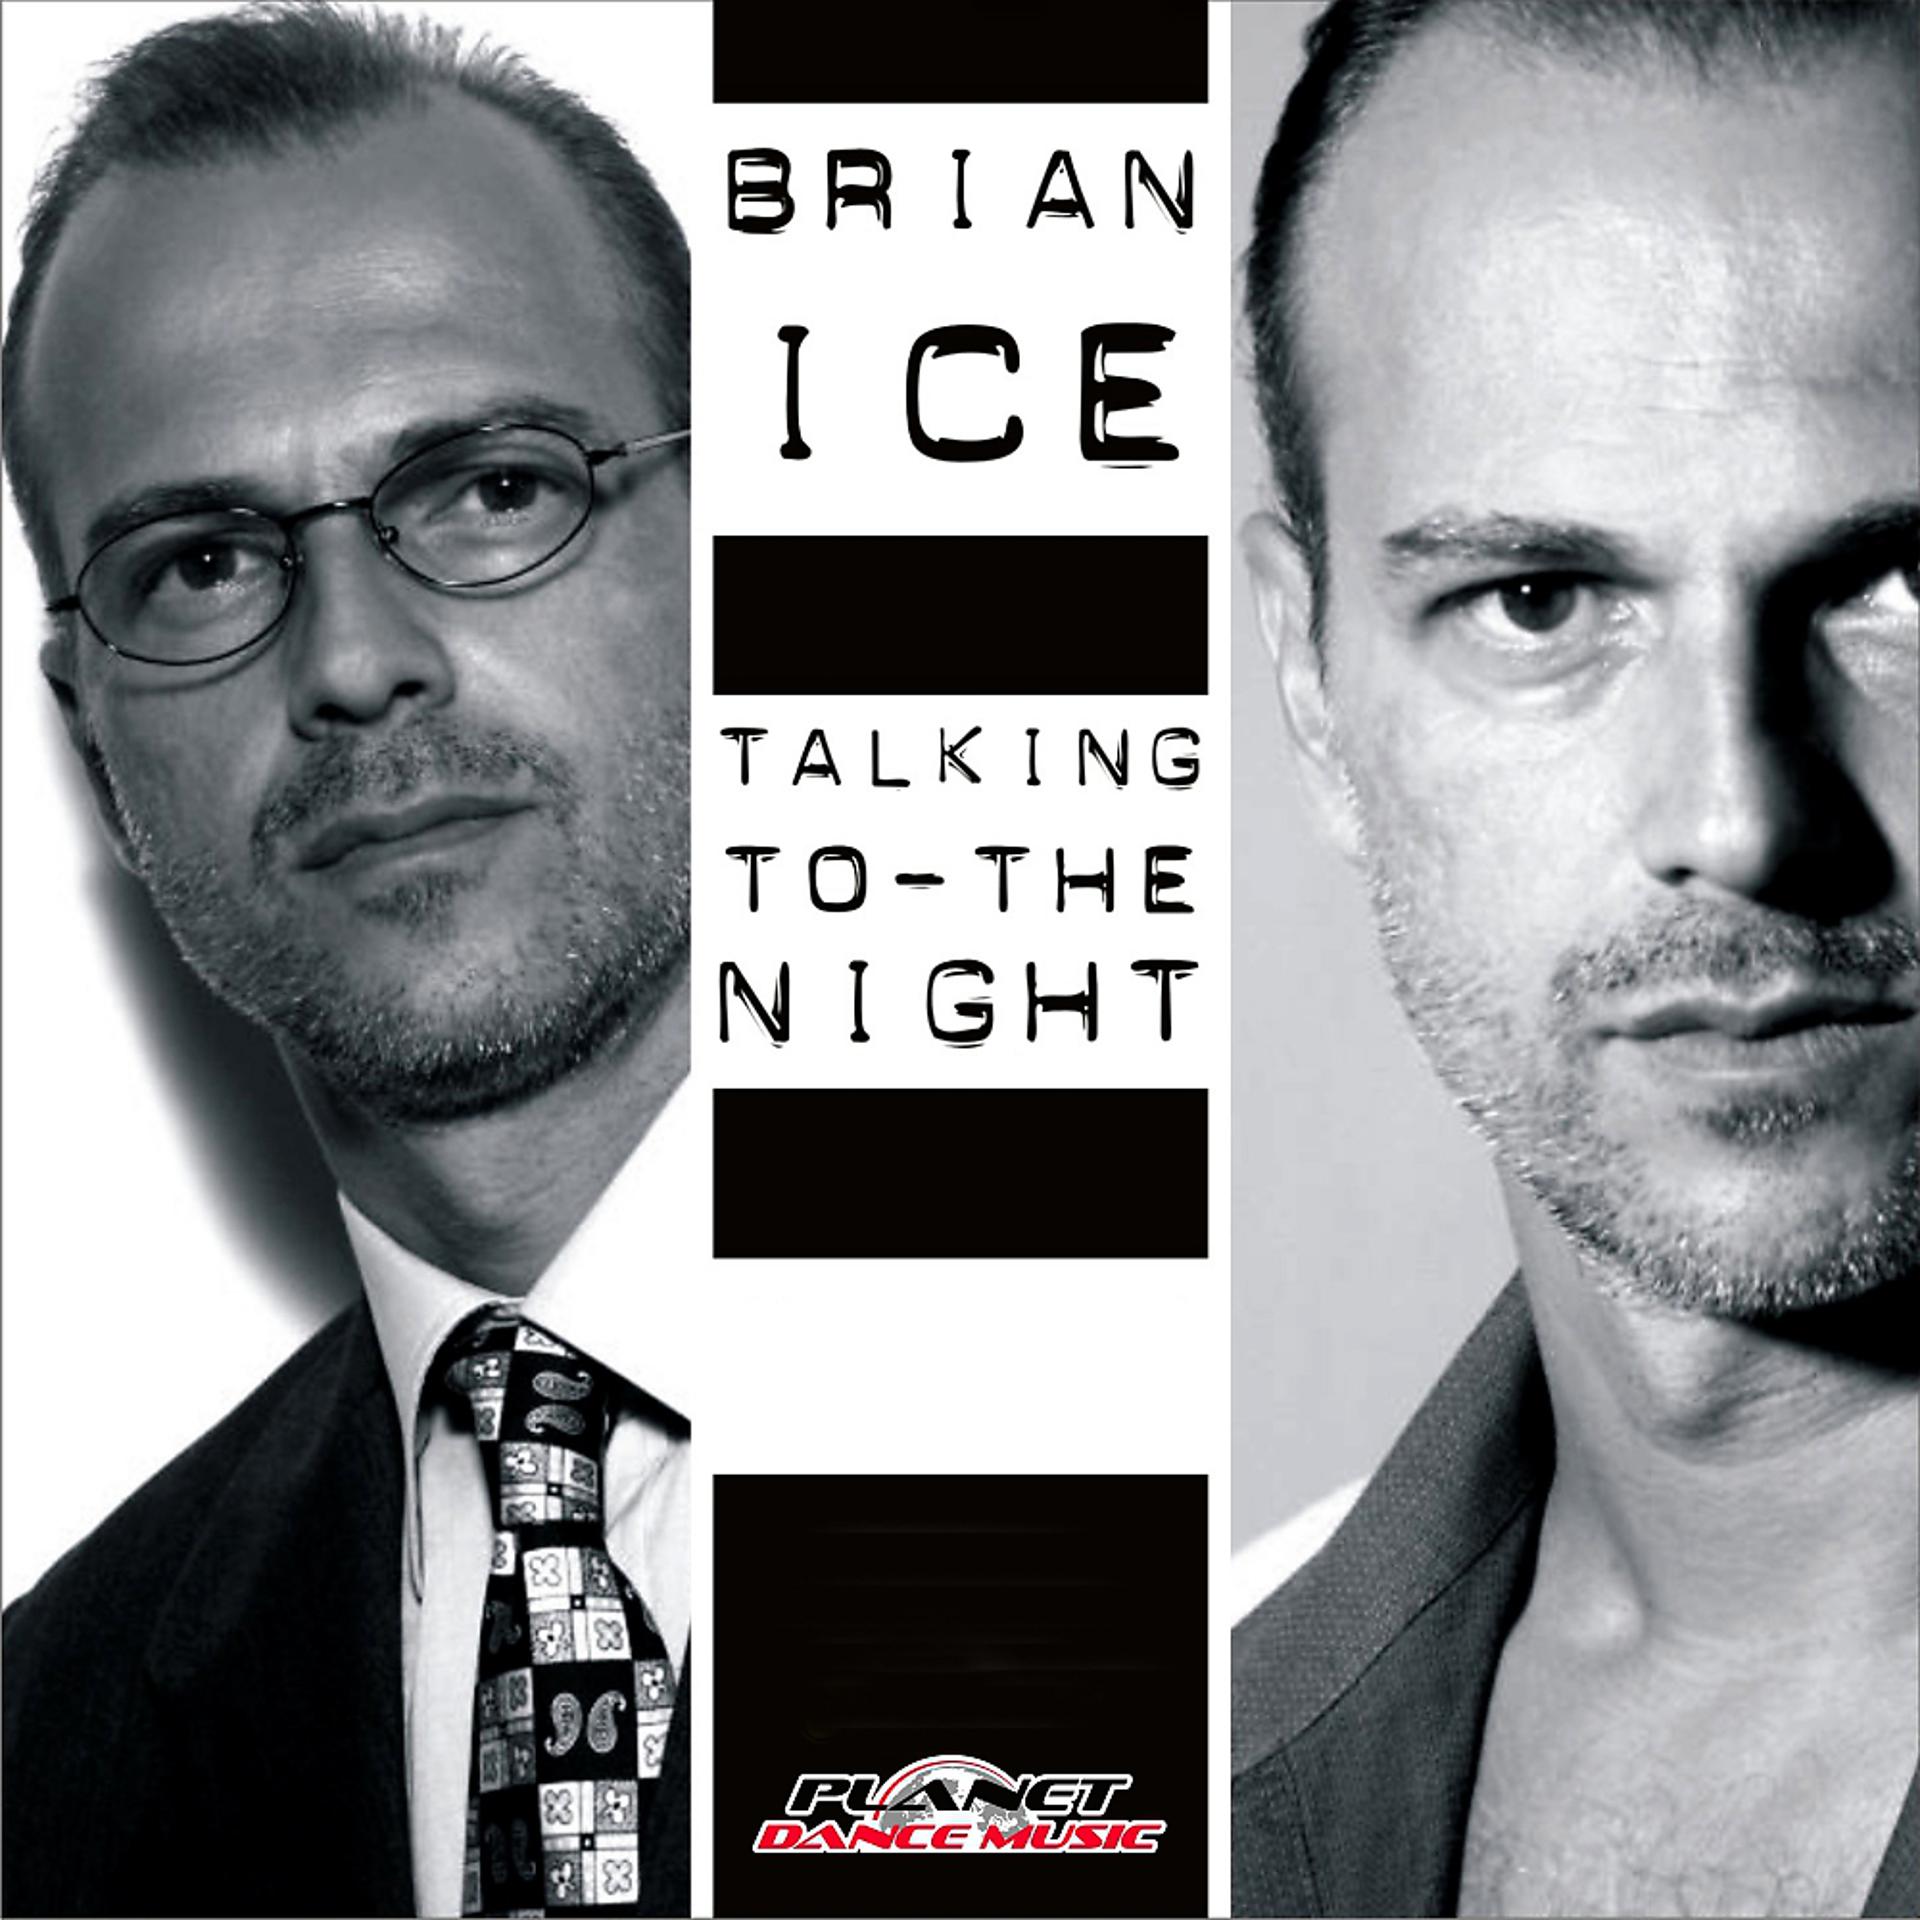 Talking to the night. Brian Ice. Brian Ice 1985 talking to the Night. Brian Ice фото. Brian Ice картинки альбомов.